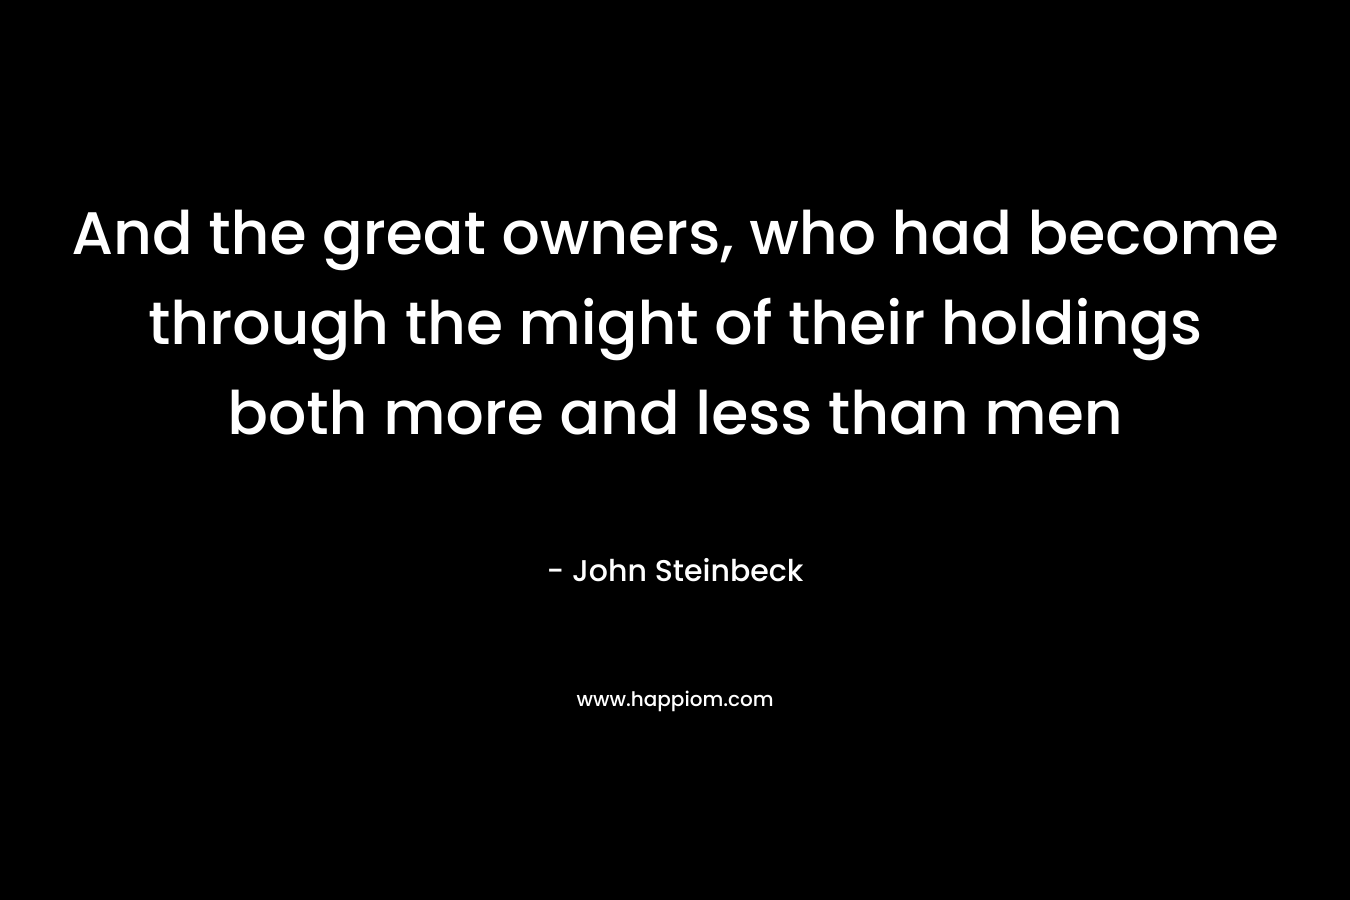 And the great owners, who had become through the might of their holdings both more and less than men – John Steinbeck